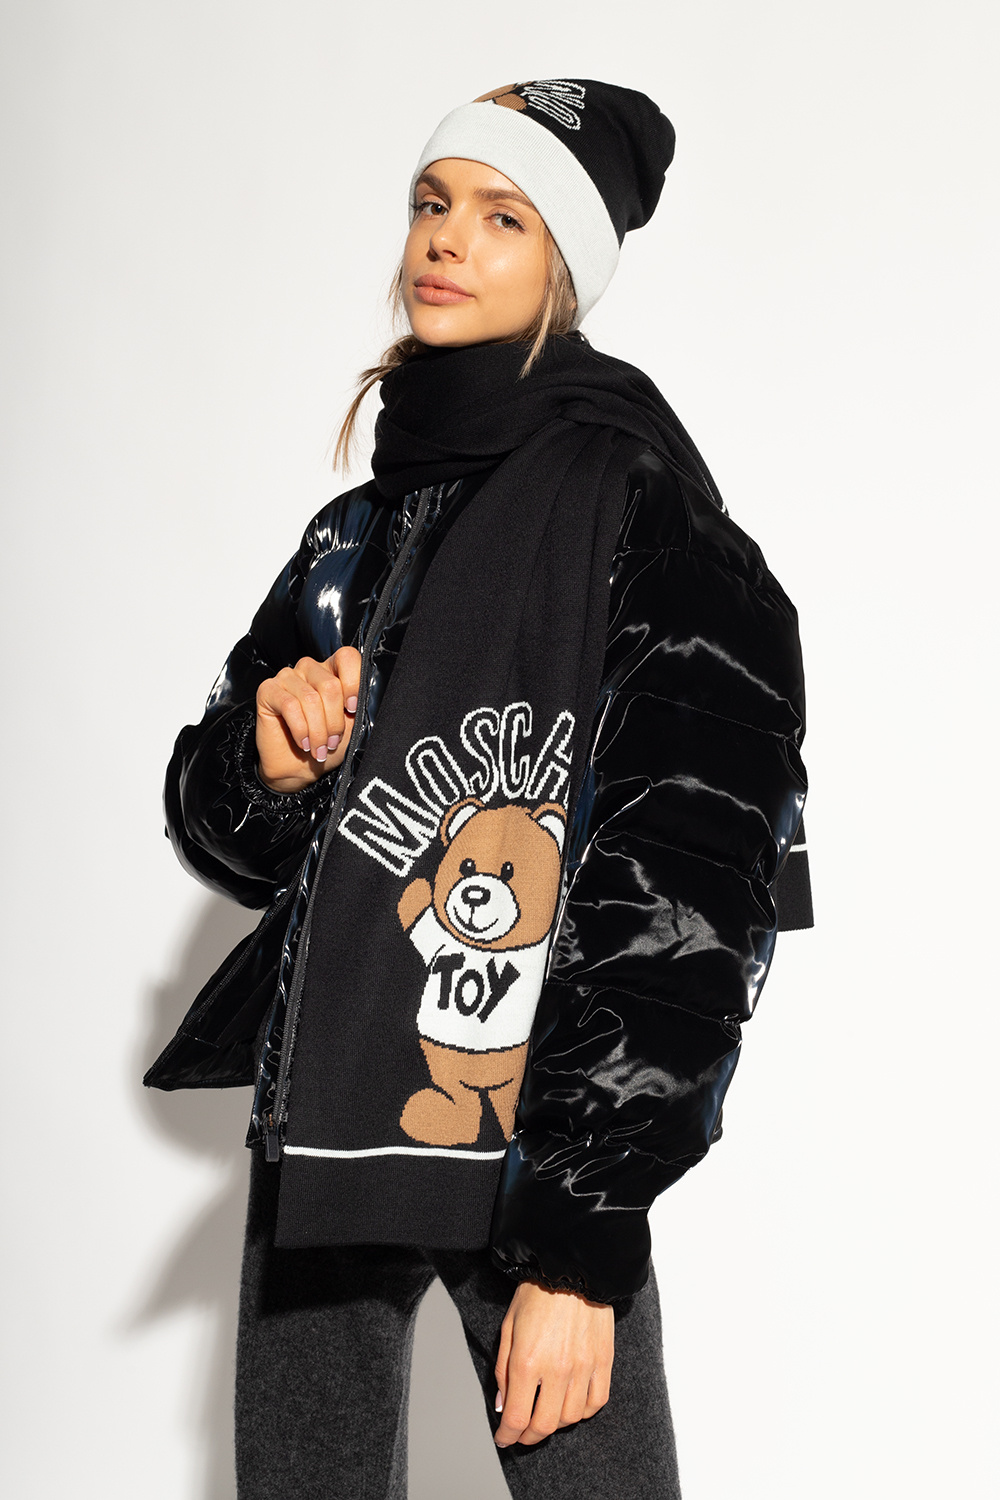 Moschino Jump into the world of kidcore